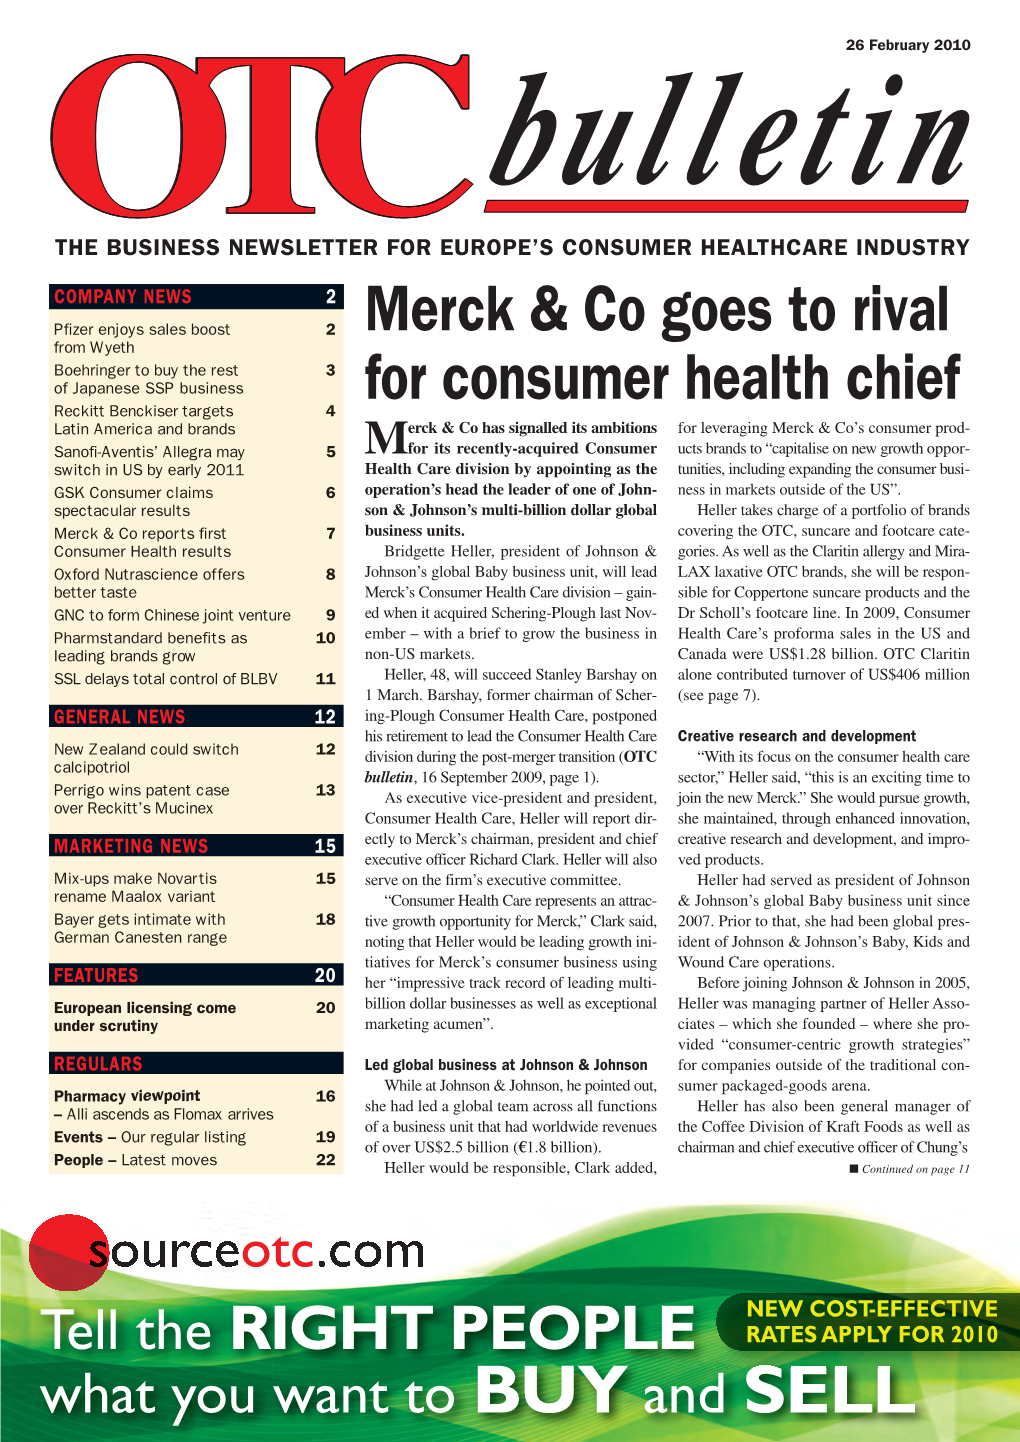 Merck & Co Goes to Rival for Consumer Health Chief